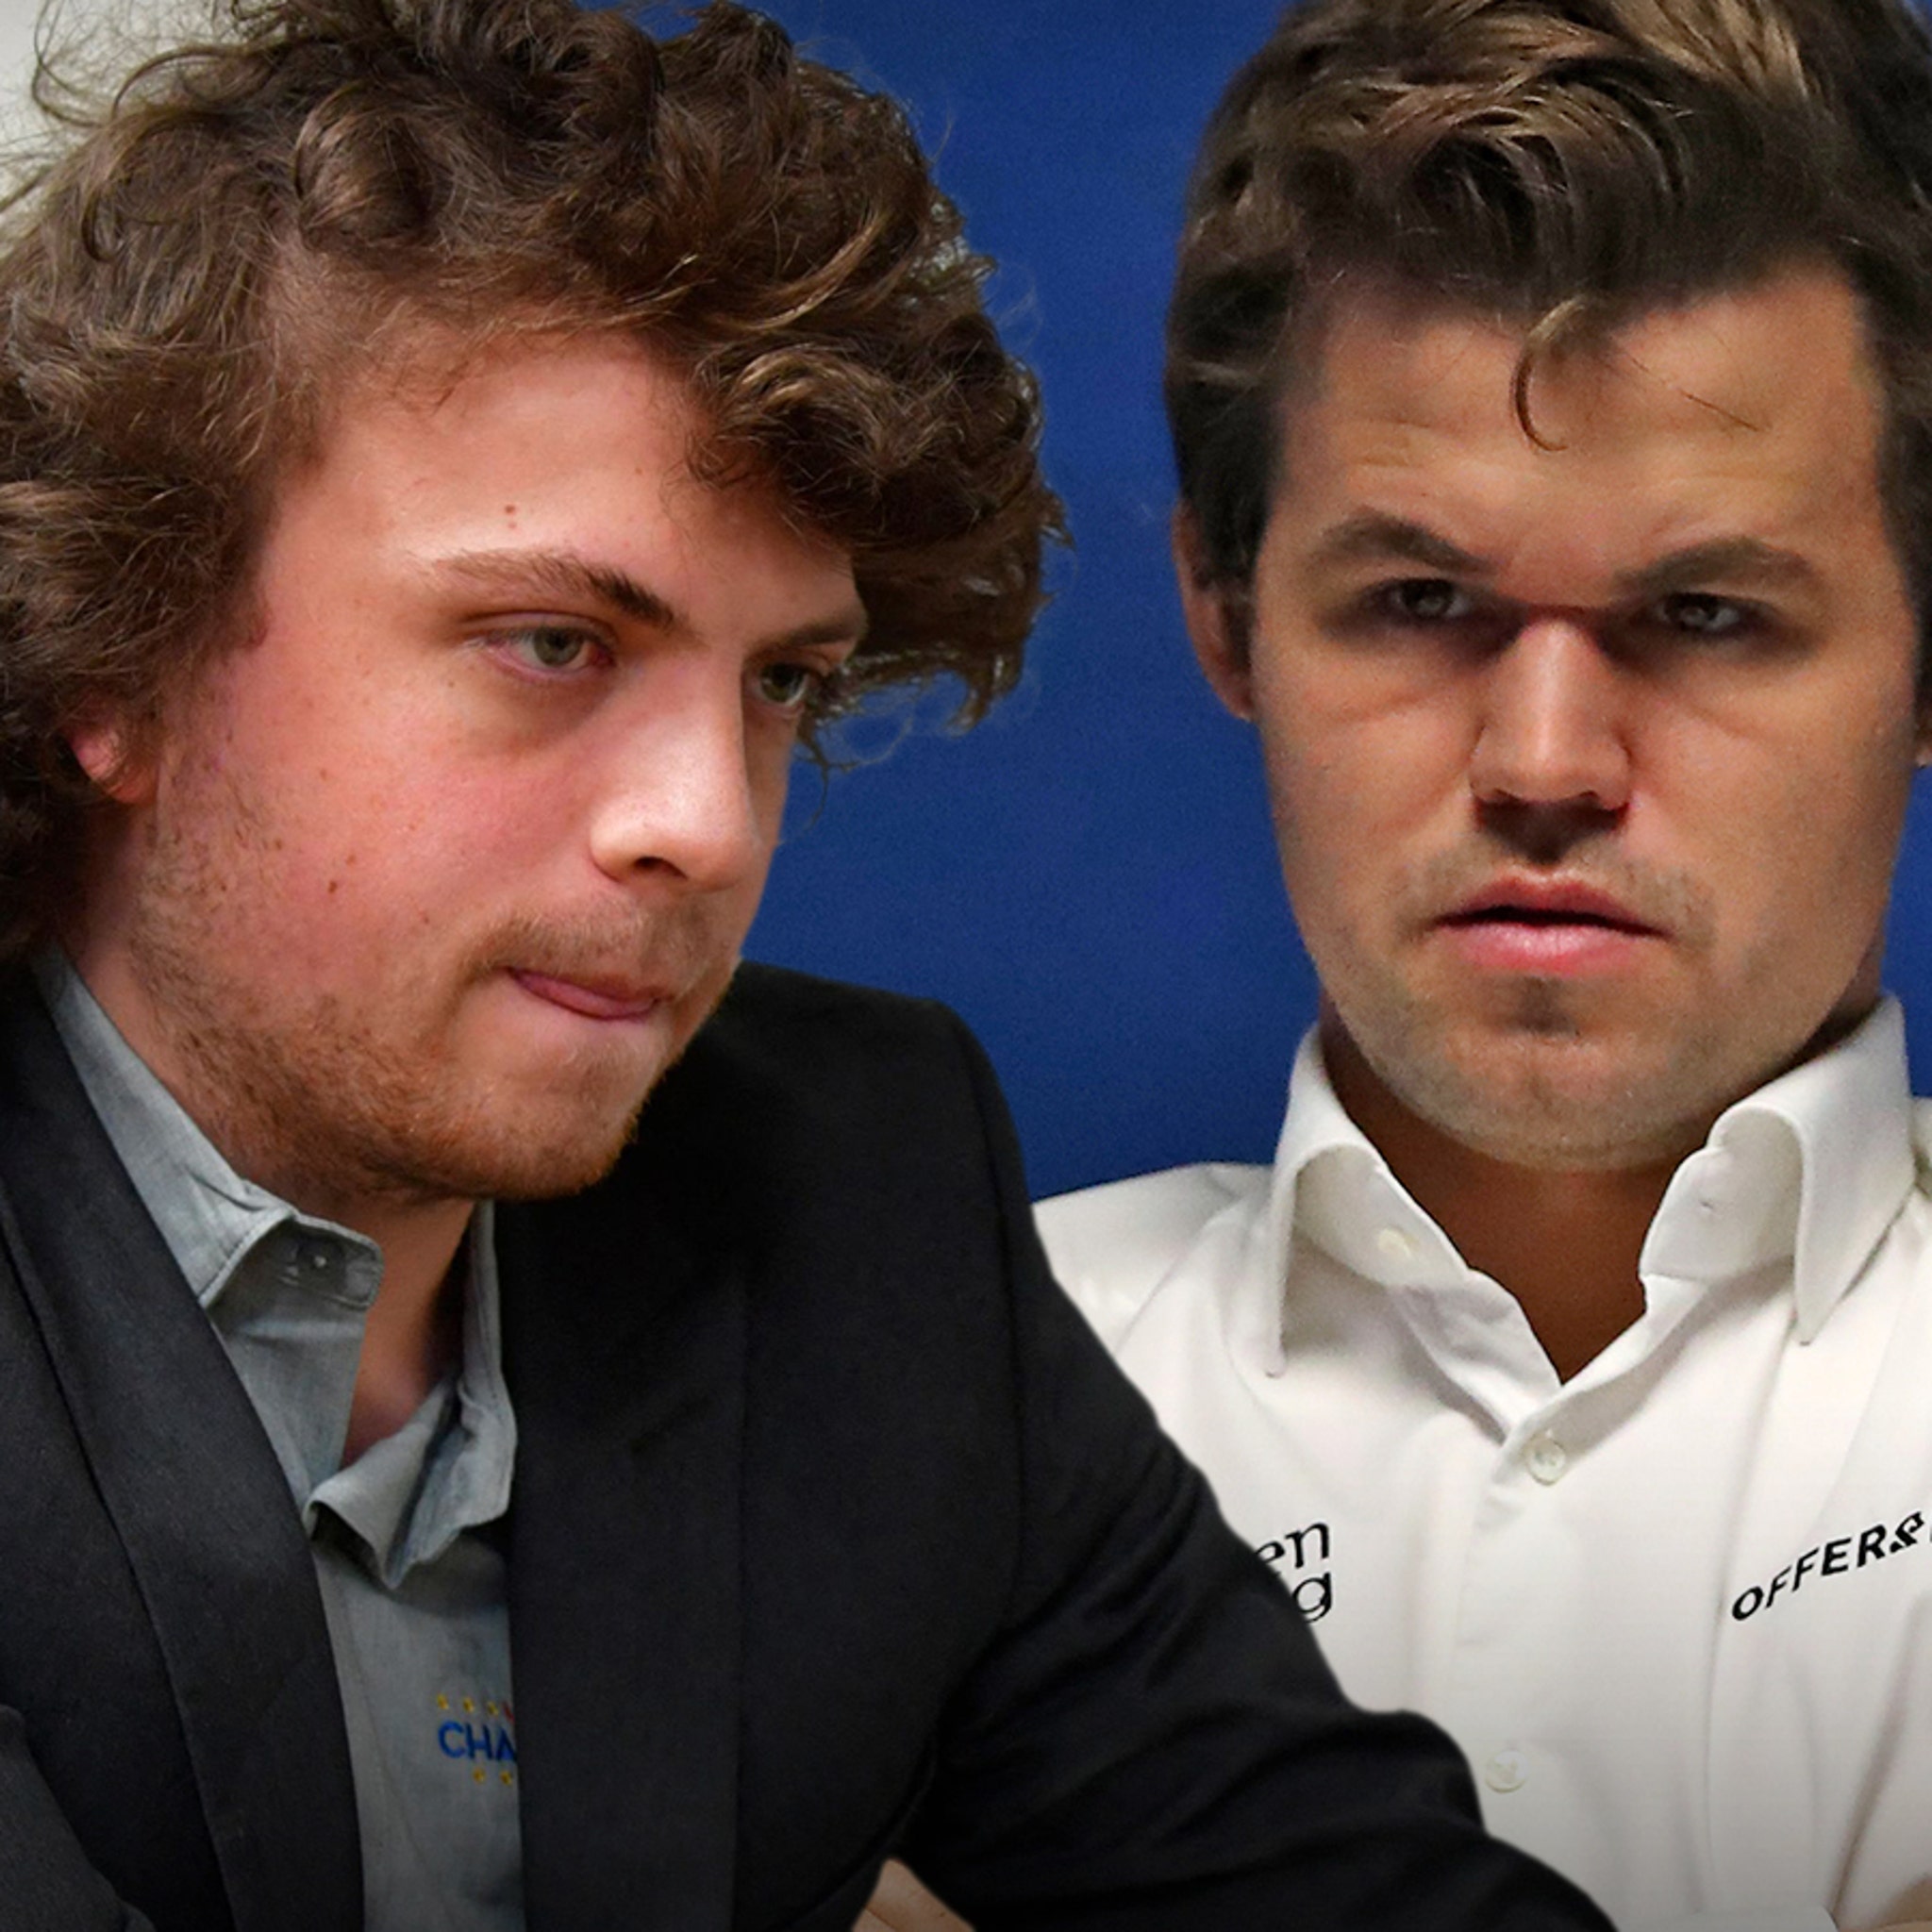 Hans Niemann sues Magnus Carlsen, others for $100 million over chess  cheating claims